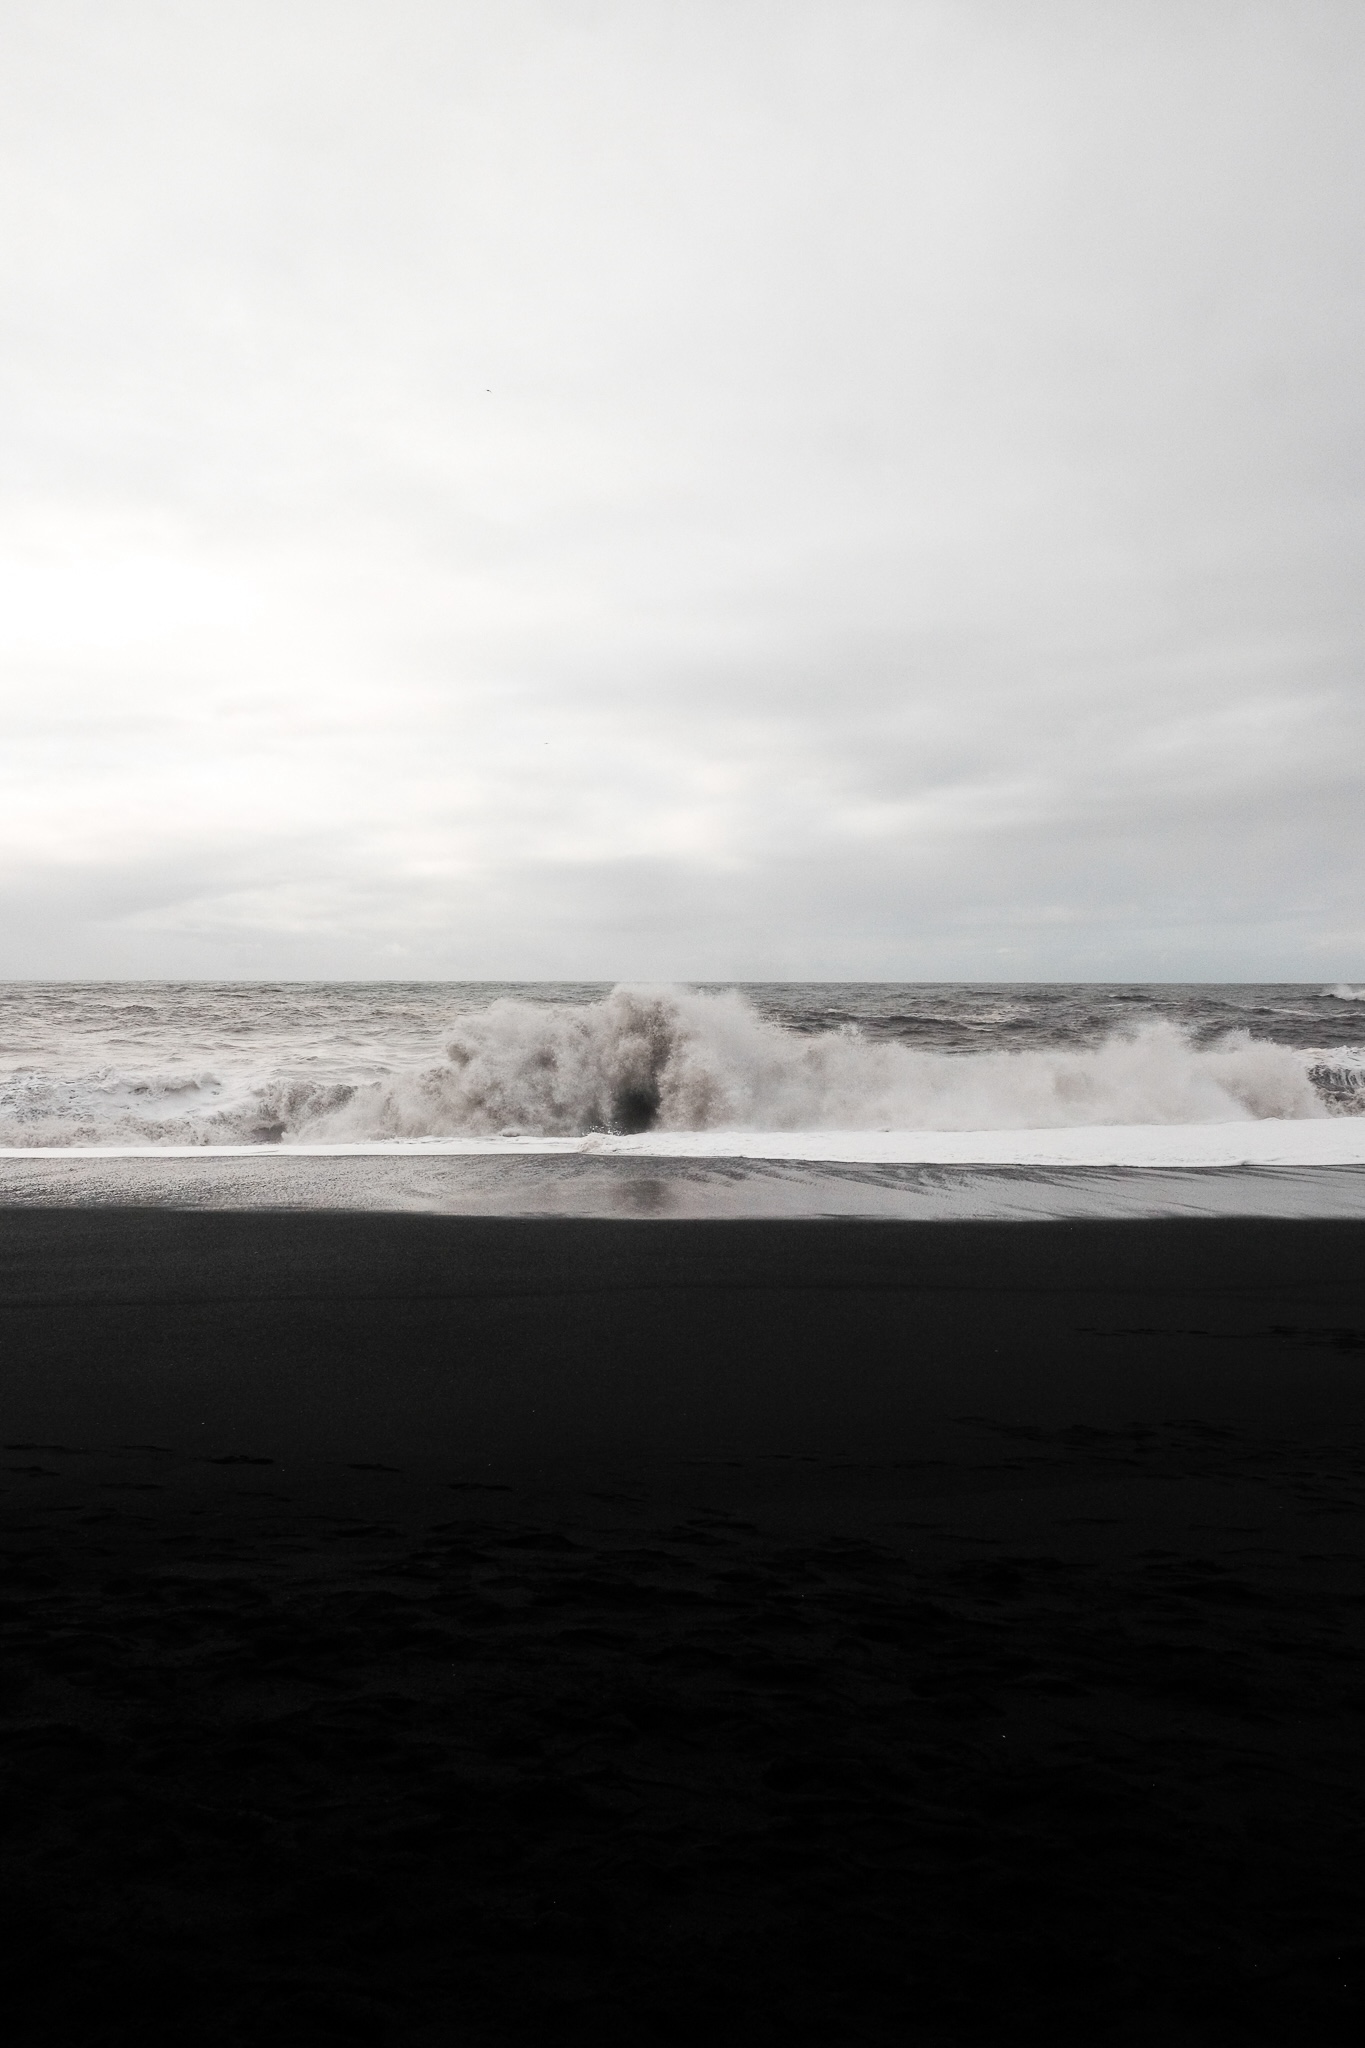 Slightly brown sea wave crashes on the black beach, the sky white and overcast, the water cuts the black half of the image in two sections of colour creating a visually pleasing pattern